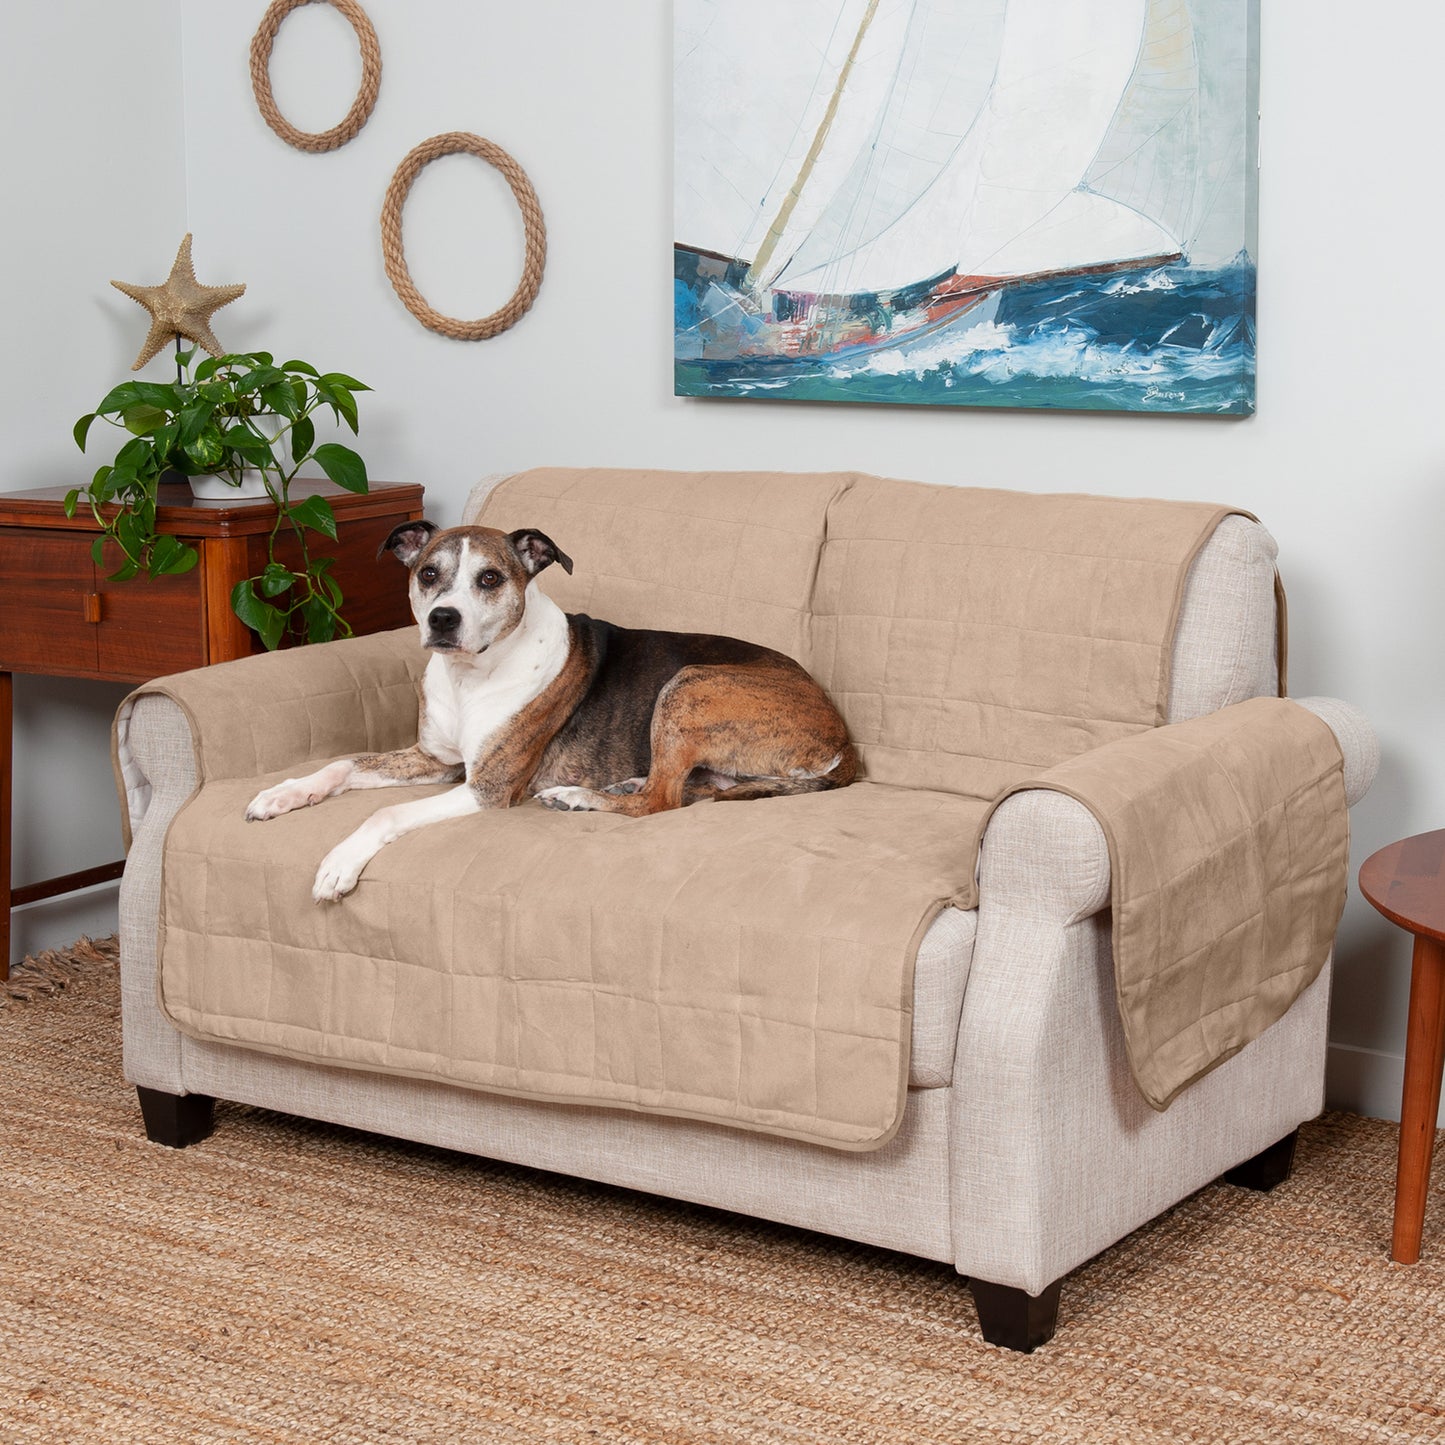 Furhaven Pet Furniture Cover | Suede Furniture Cover Protector for Dogs & Cats, Clay, Loveseat